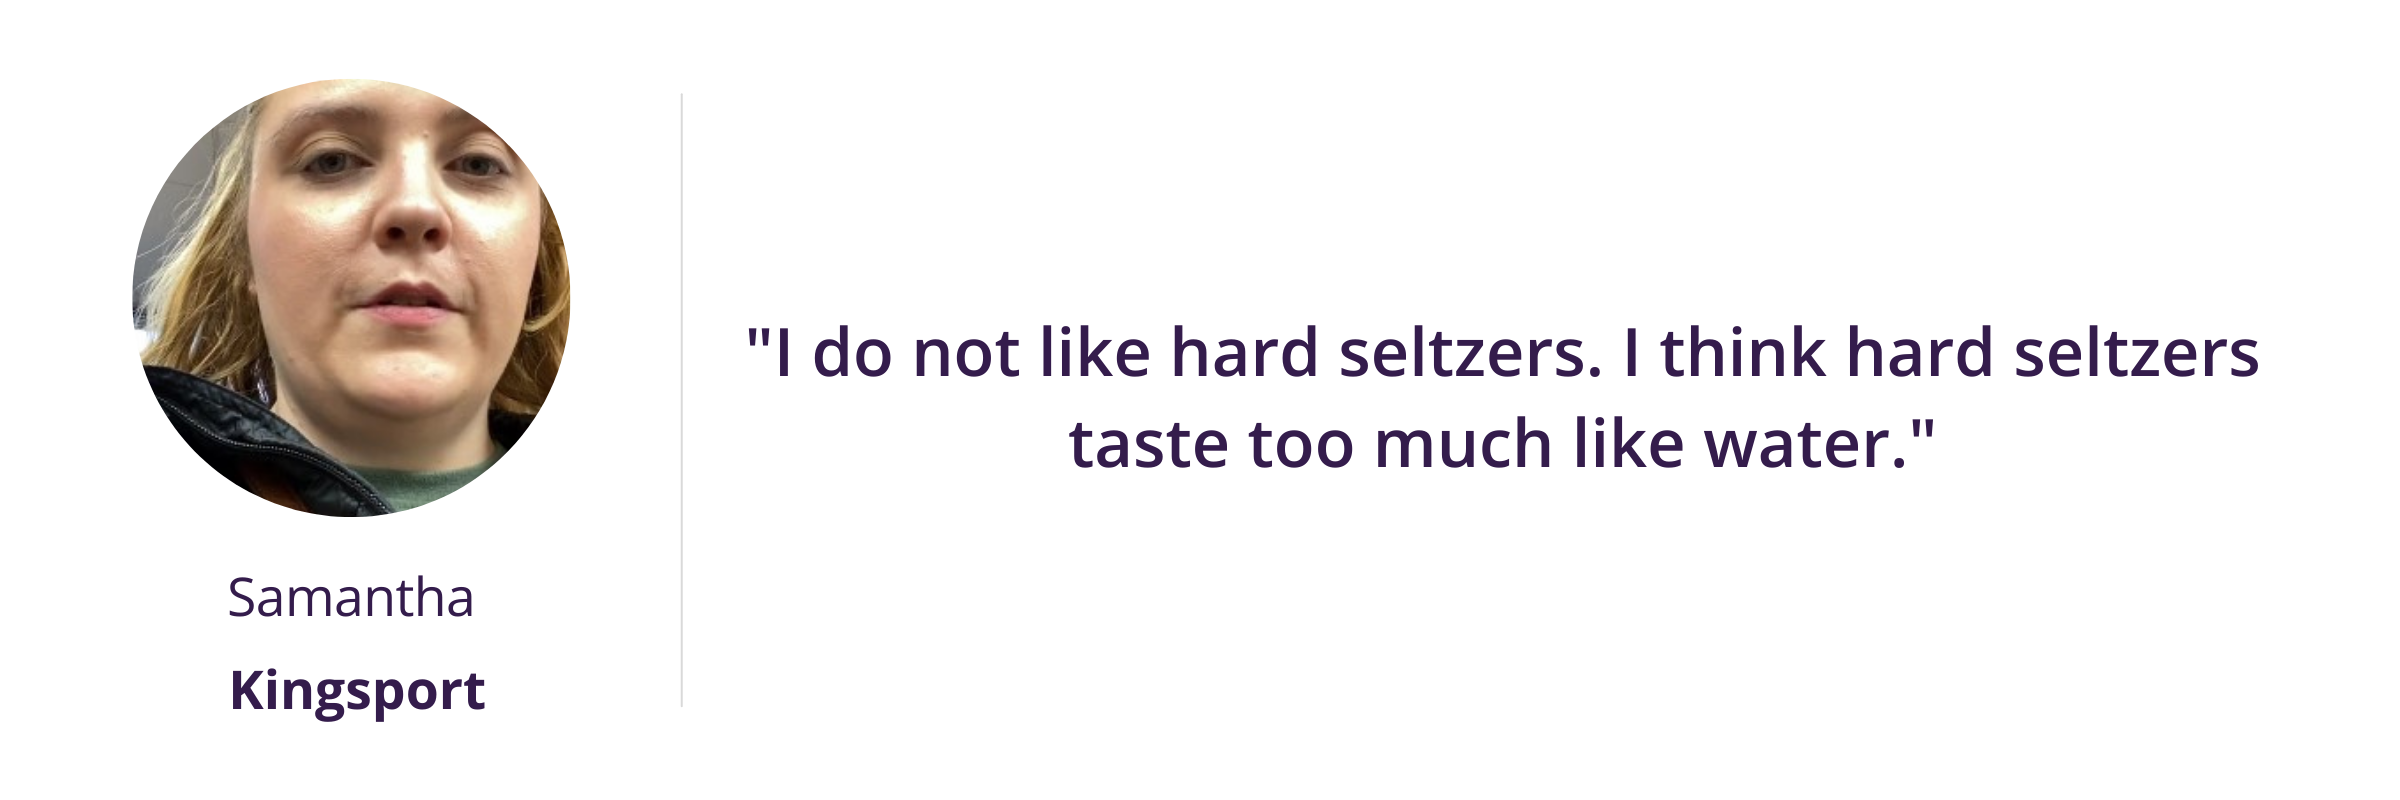 I do not like hard seltzers. I think hard seltzers taste too much like water.